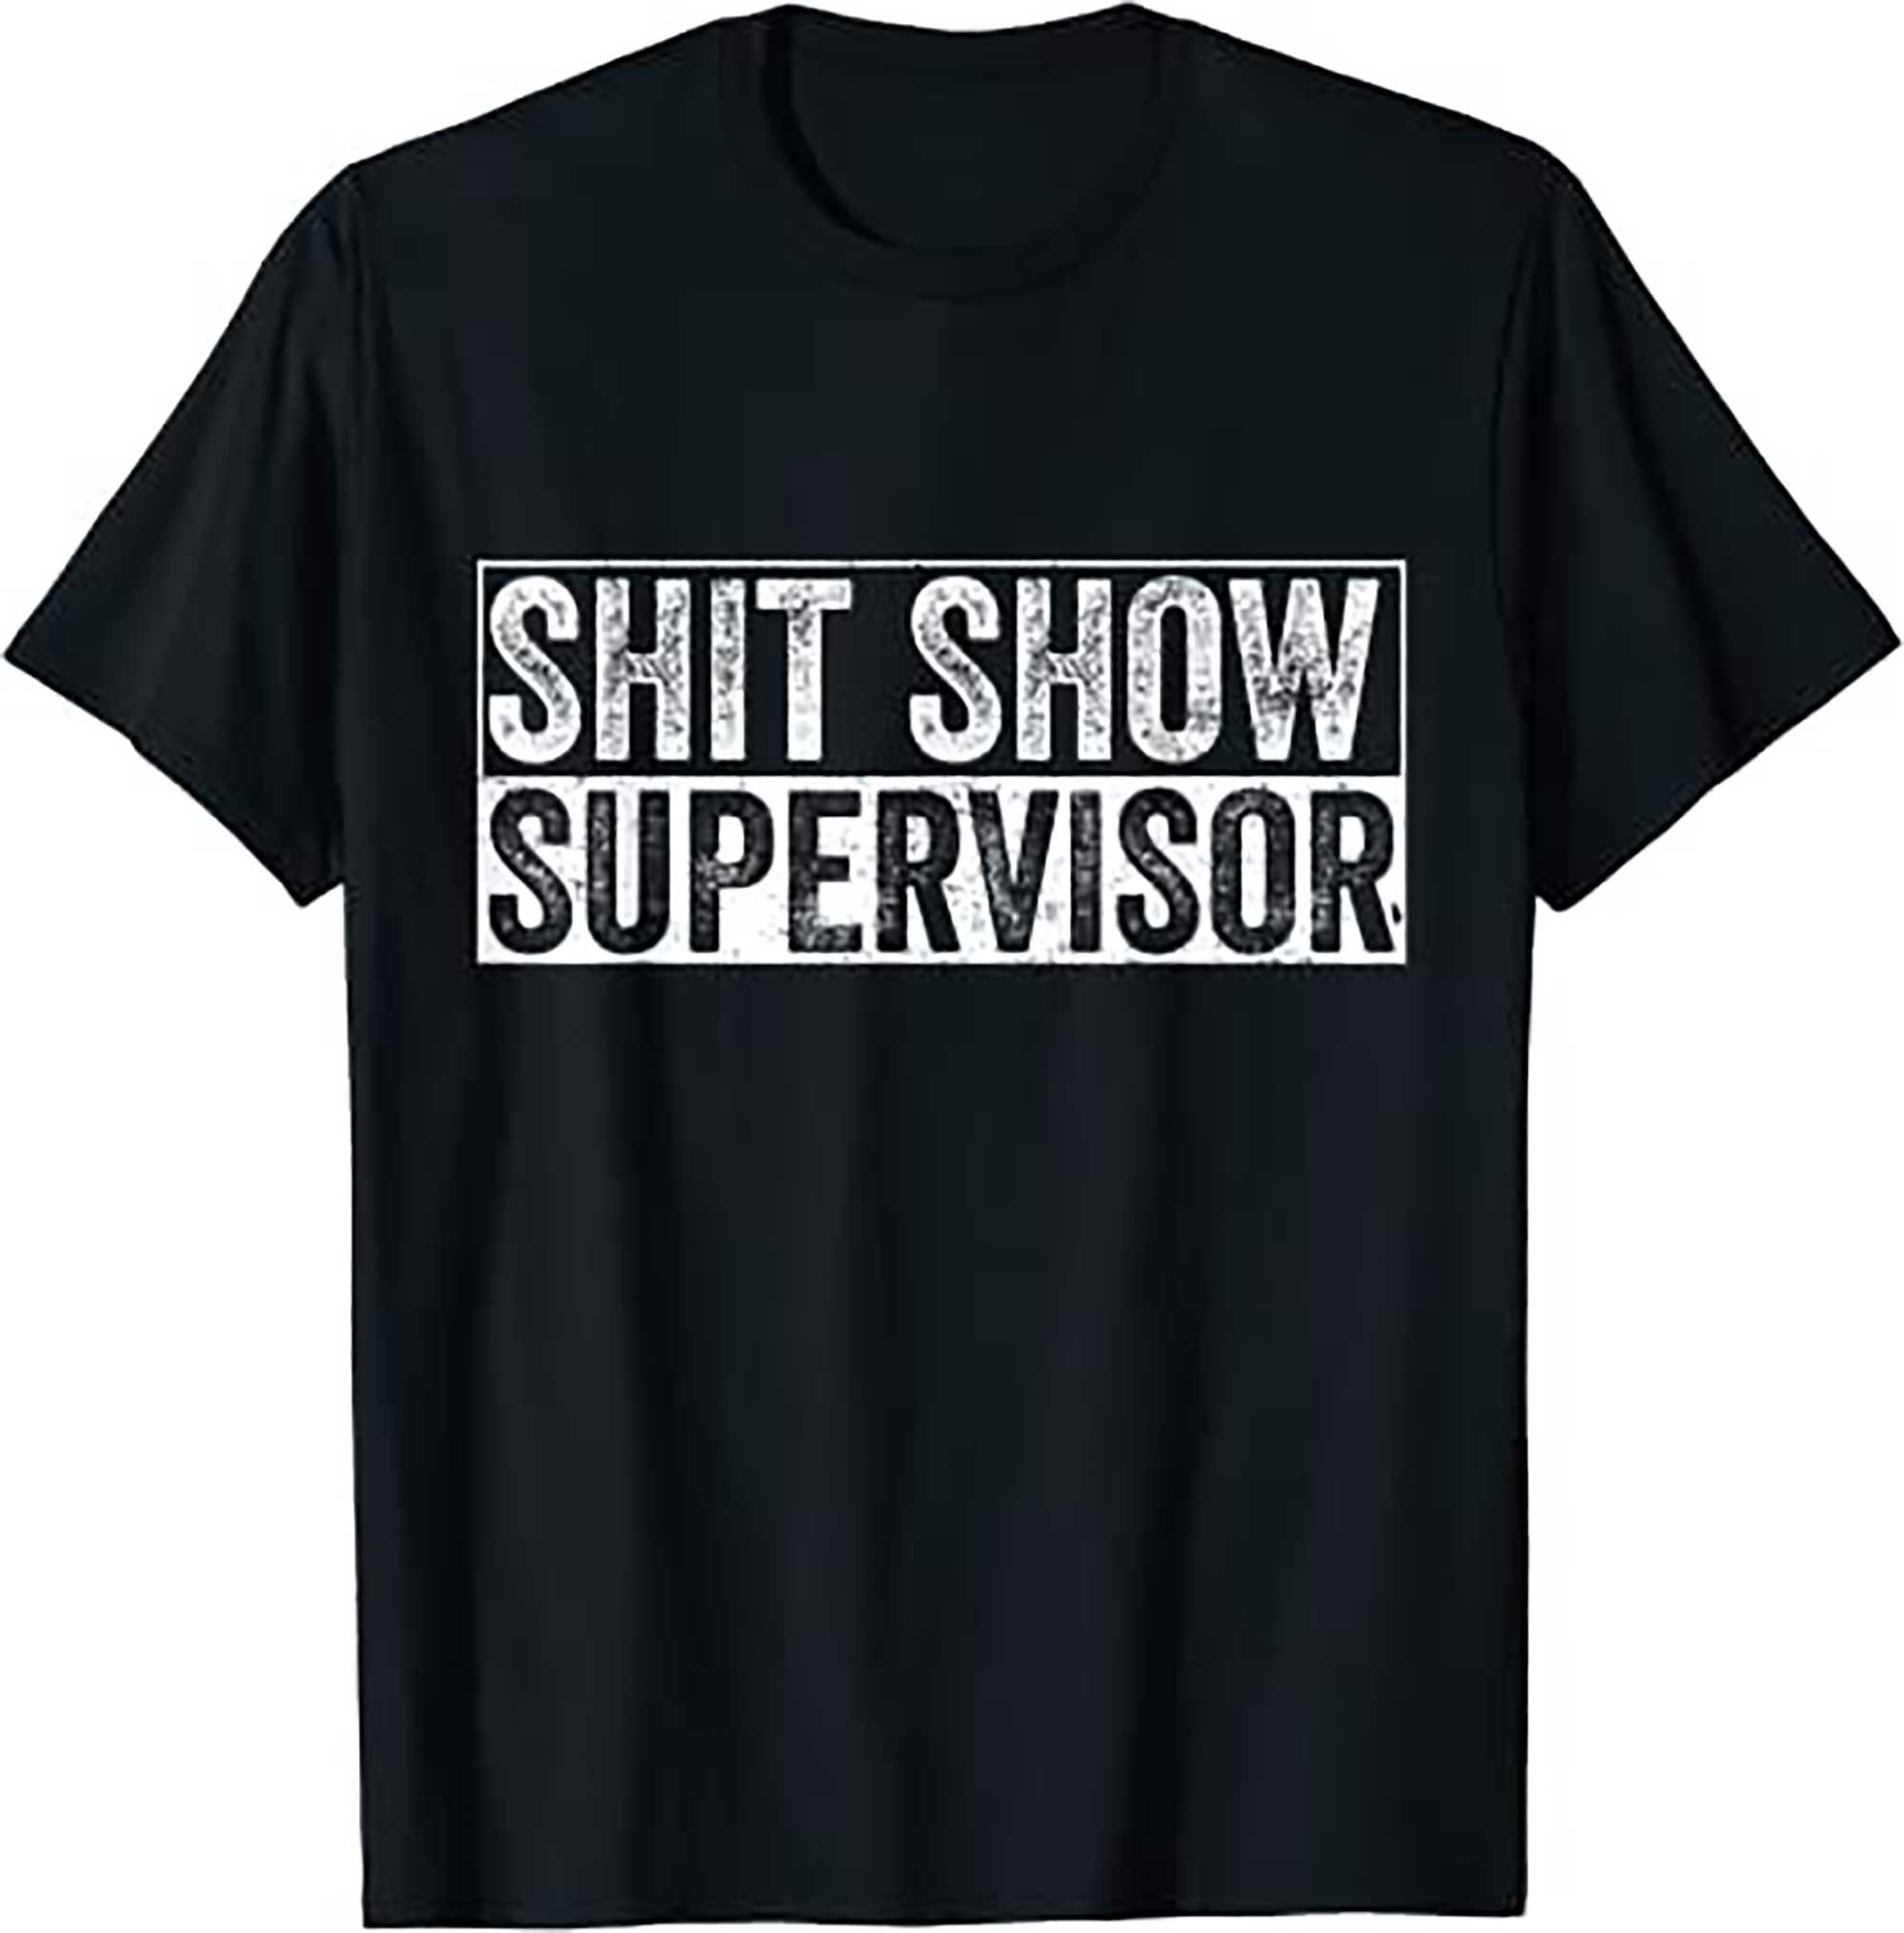 Cool S.h.i.t Show Supervisor Hilarious Vintage For Adults T Shirt